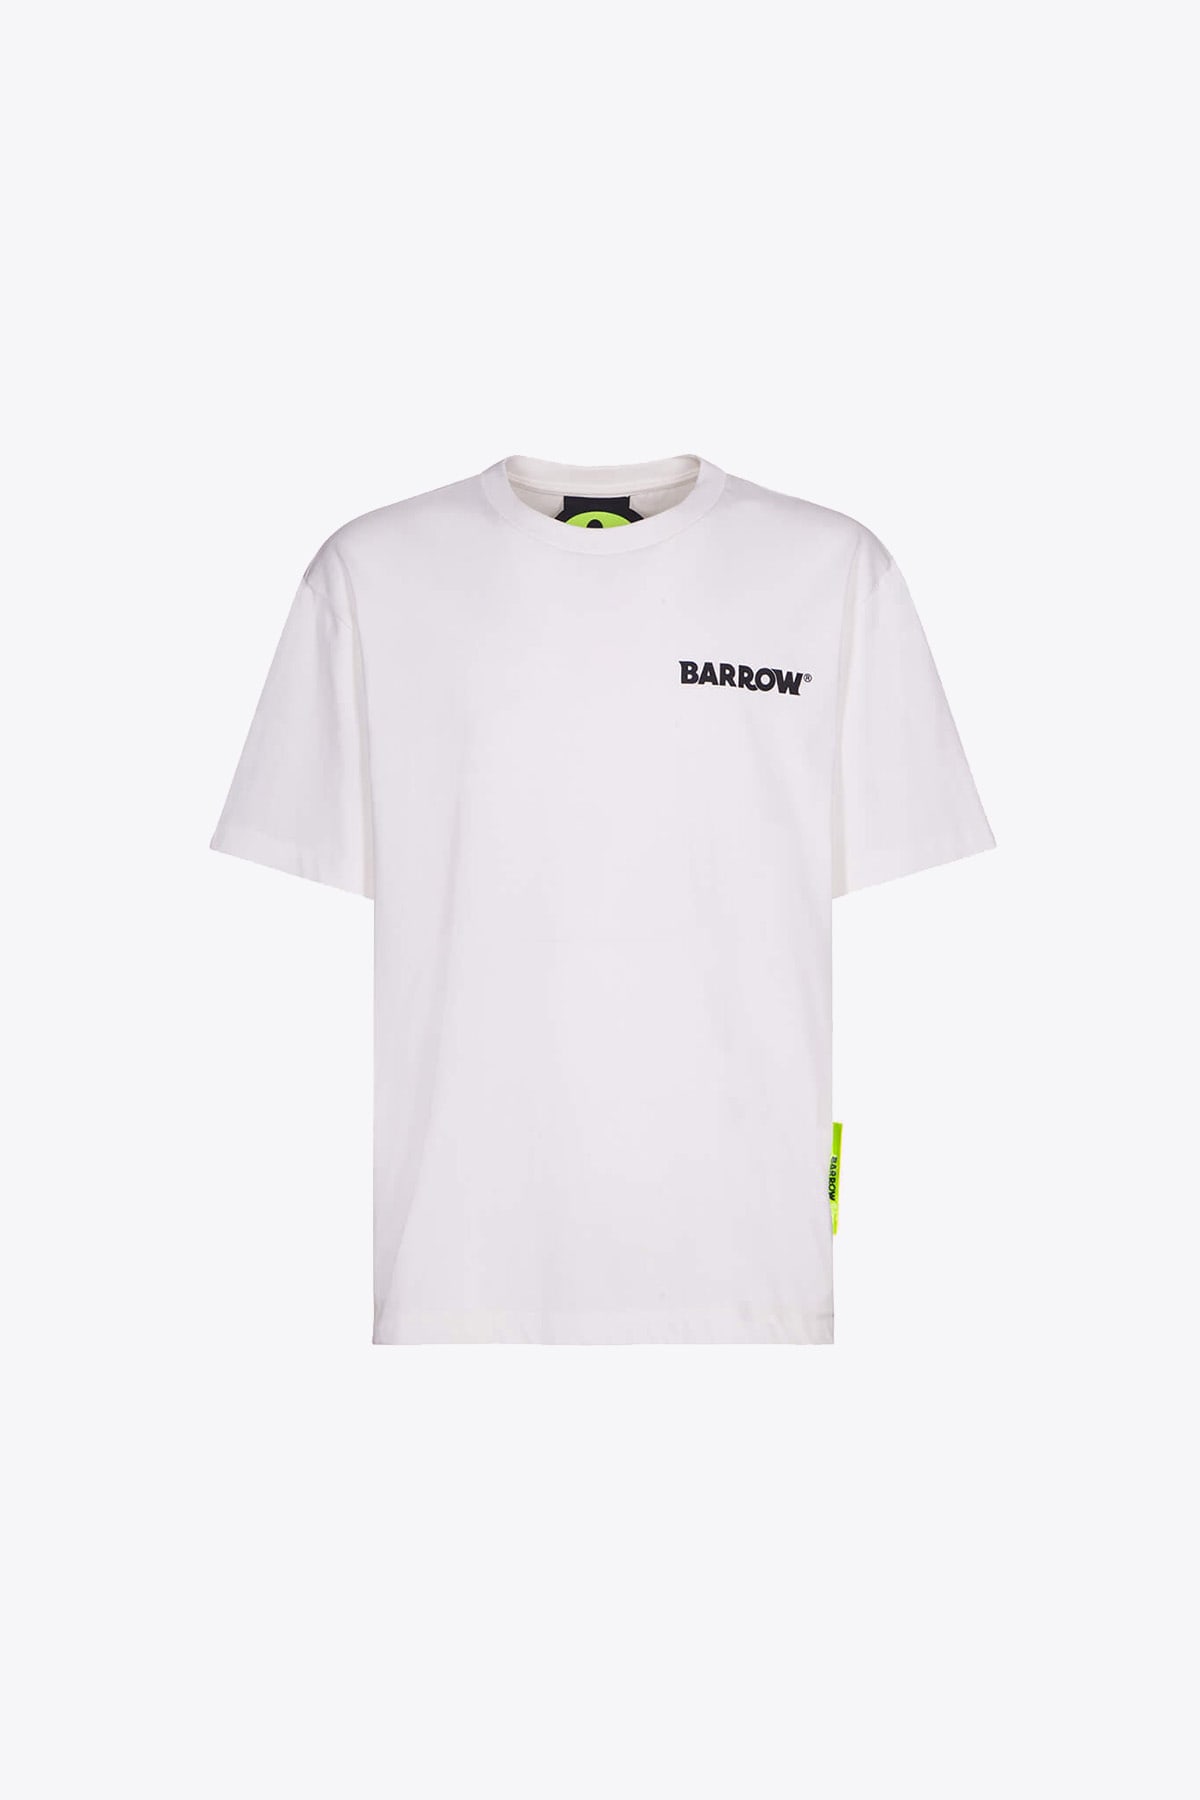 Barrow T-shirt Jersey Unisex White cotton t-shirt with back print